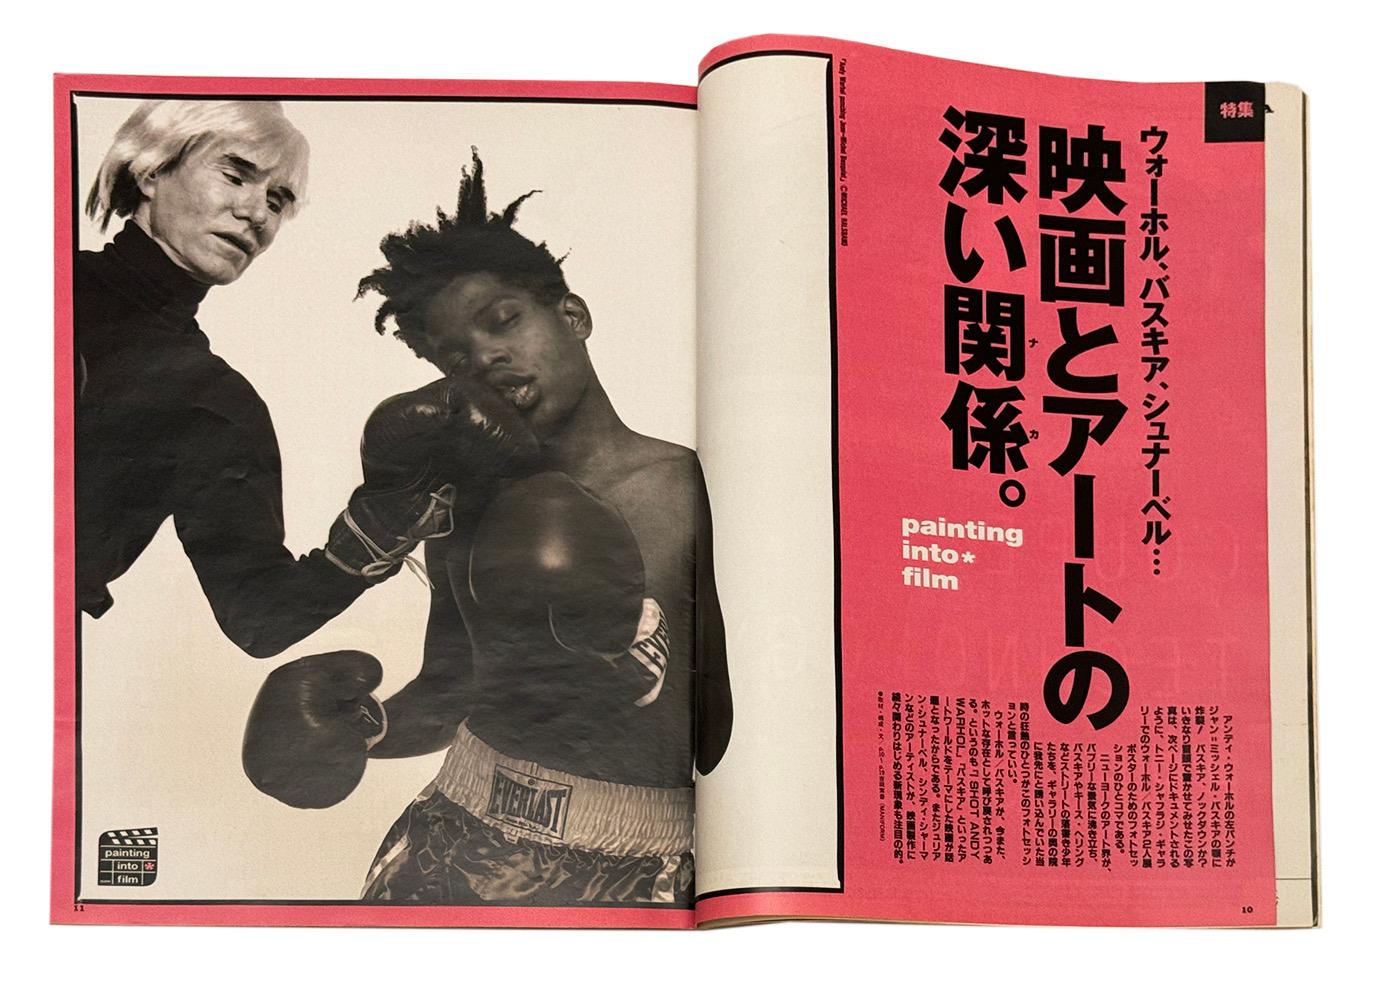 Rare vintage 1997 Brutus magazine (Japan) exploring the history of Basquiat and documenting the release of Schnabel's Basquiat film release in Japan in 1997. Cover presents a reproduction of Michael Halsband's much iconic Warhol/Basquiat boxing